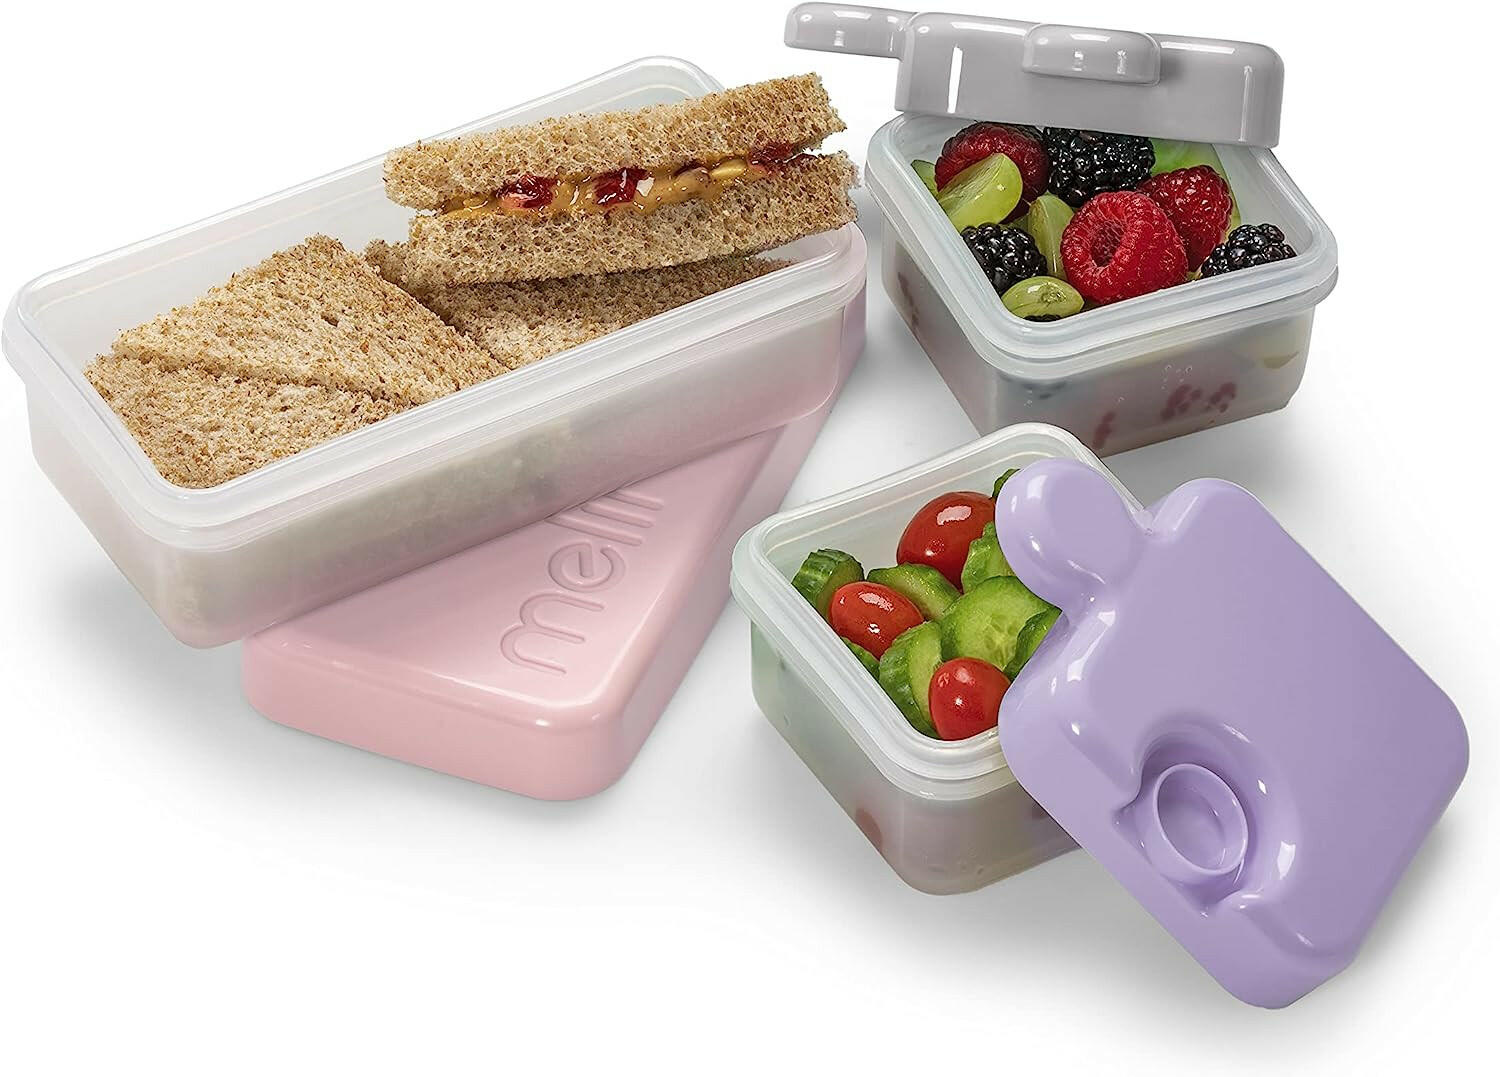 Melii Puzzle Container - Pink, Purple, Grey.